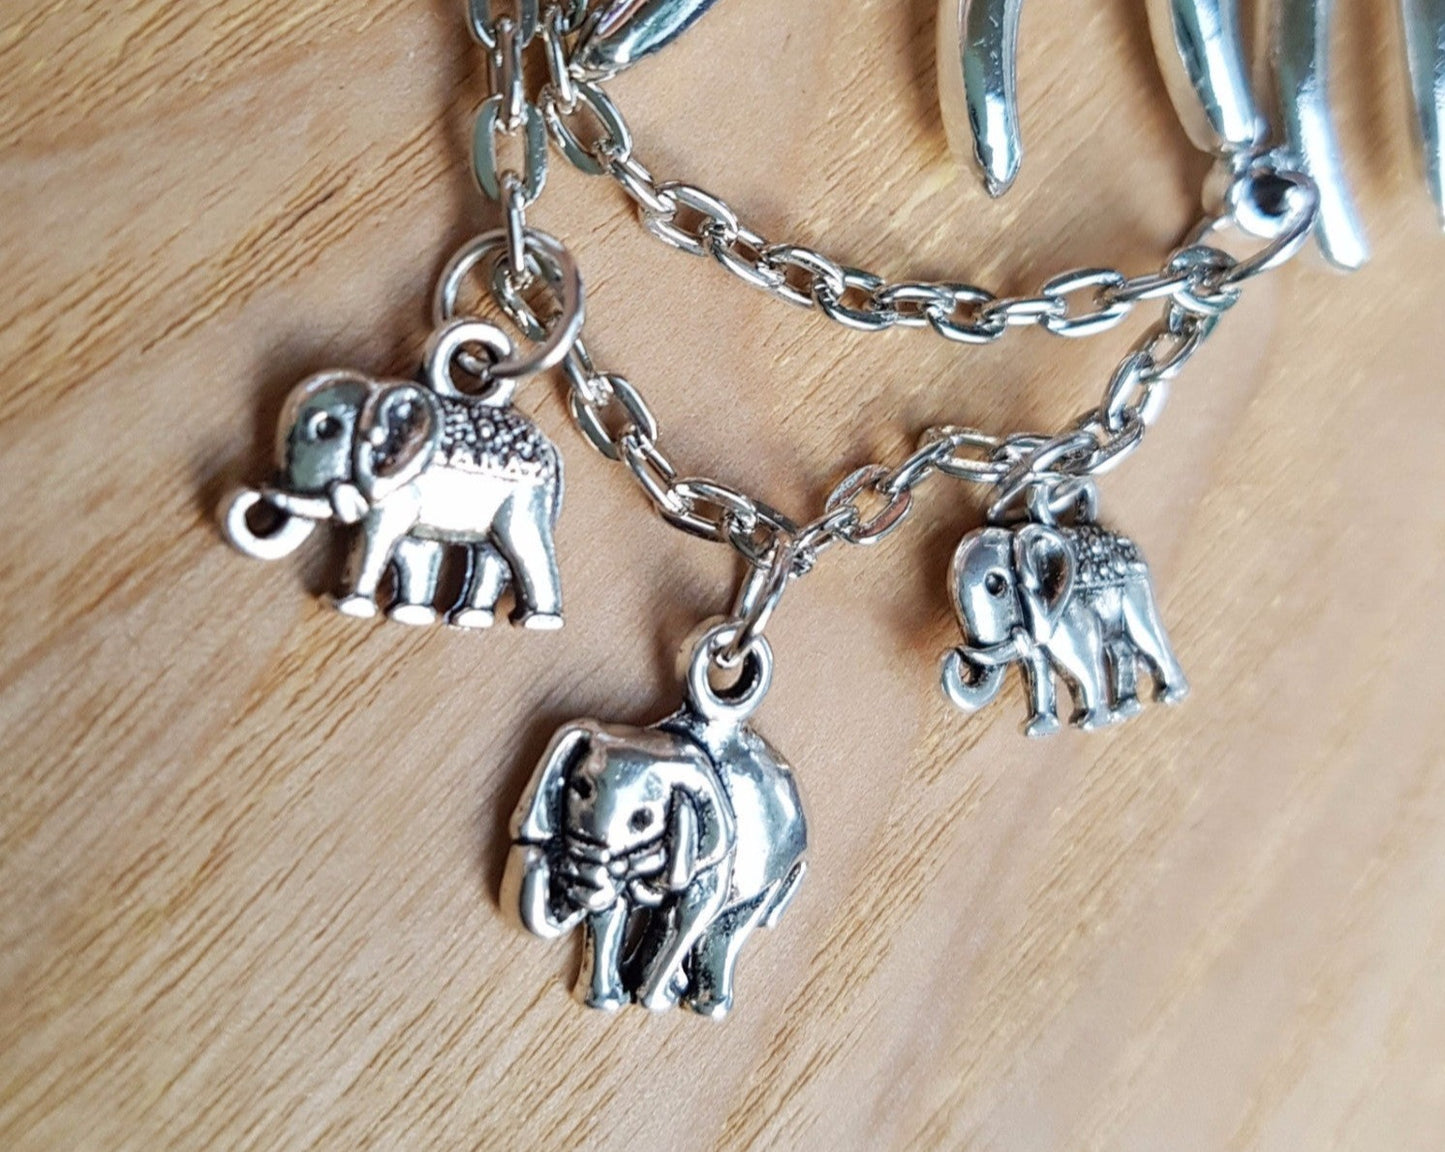 Silver tone Elephant Family Necklace, two adult elephants with baby elephants dangling below with siler chain.  